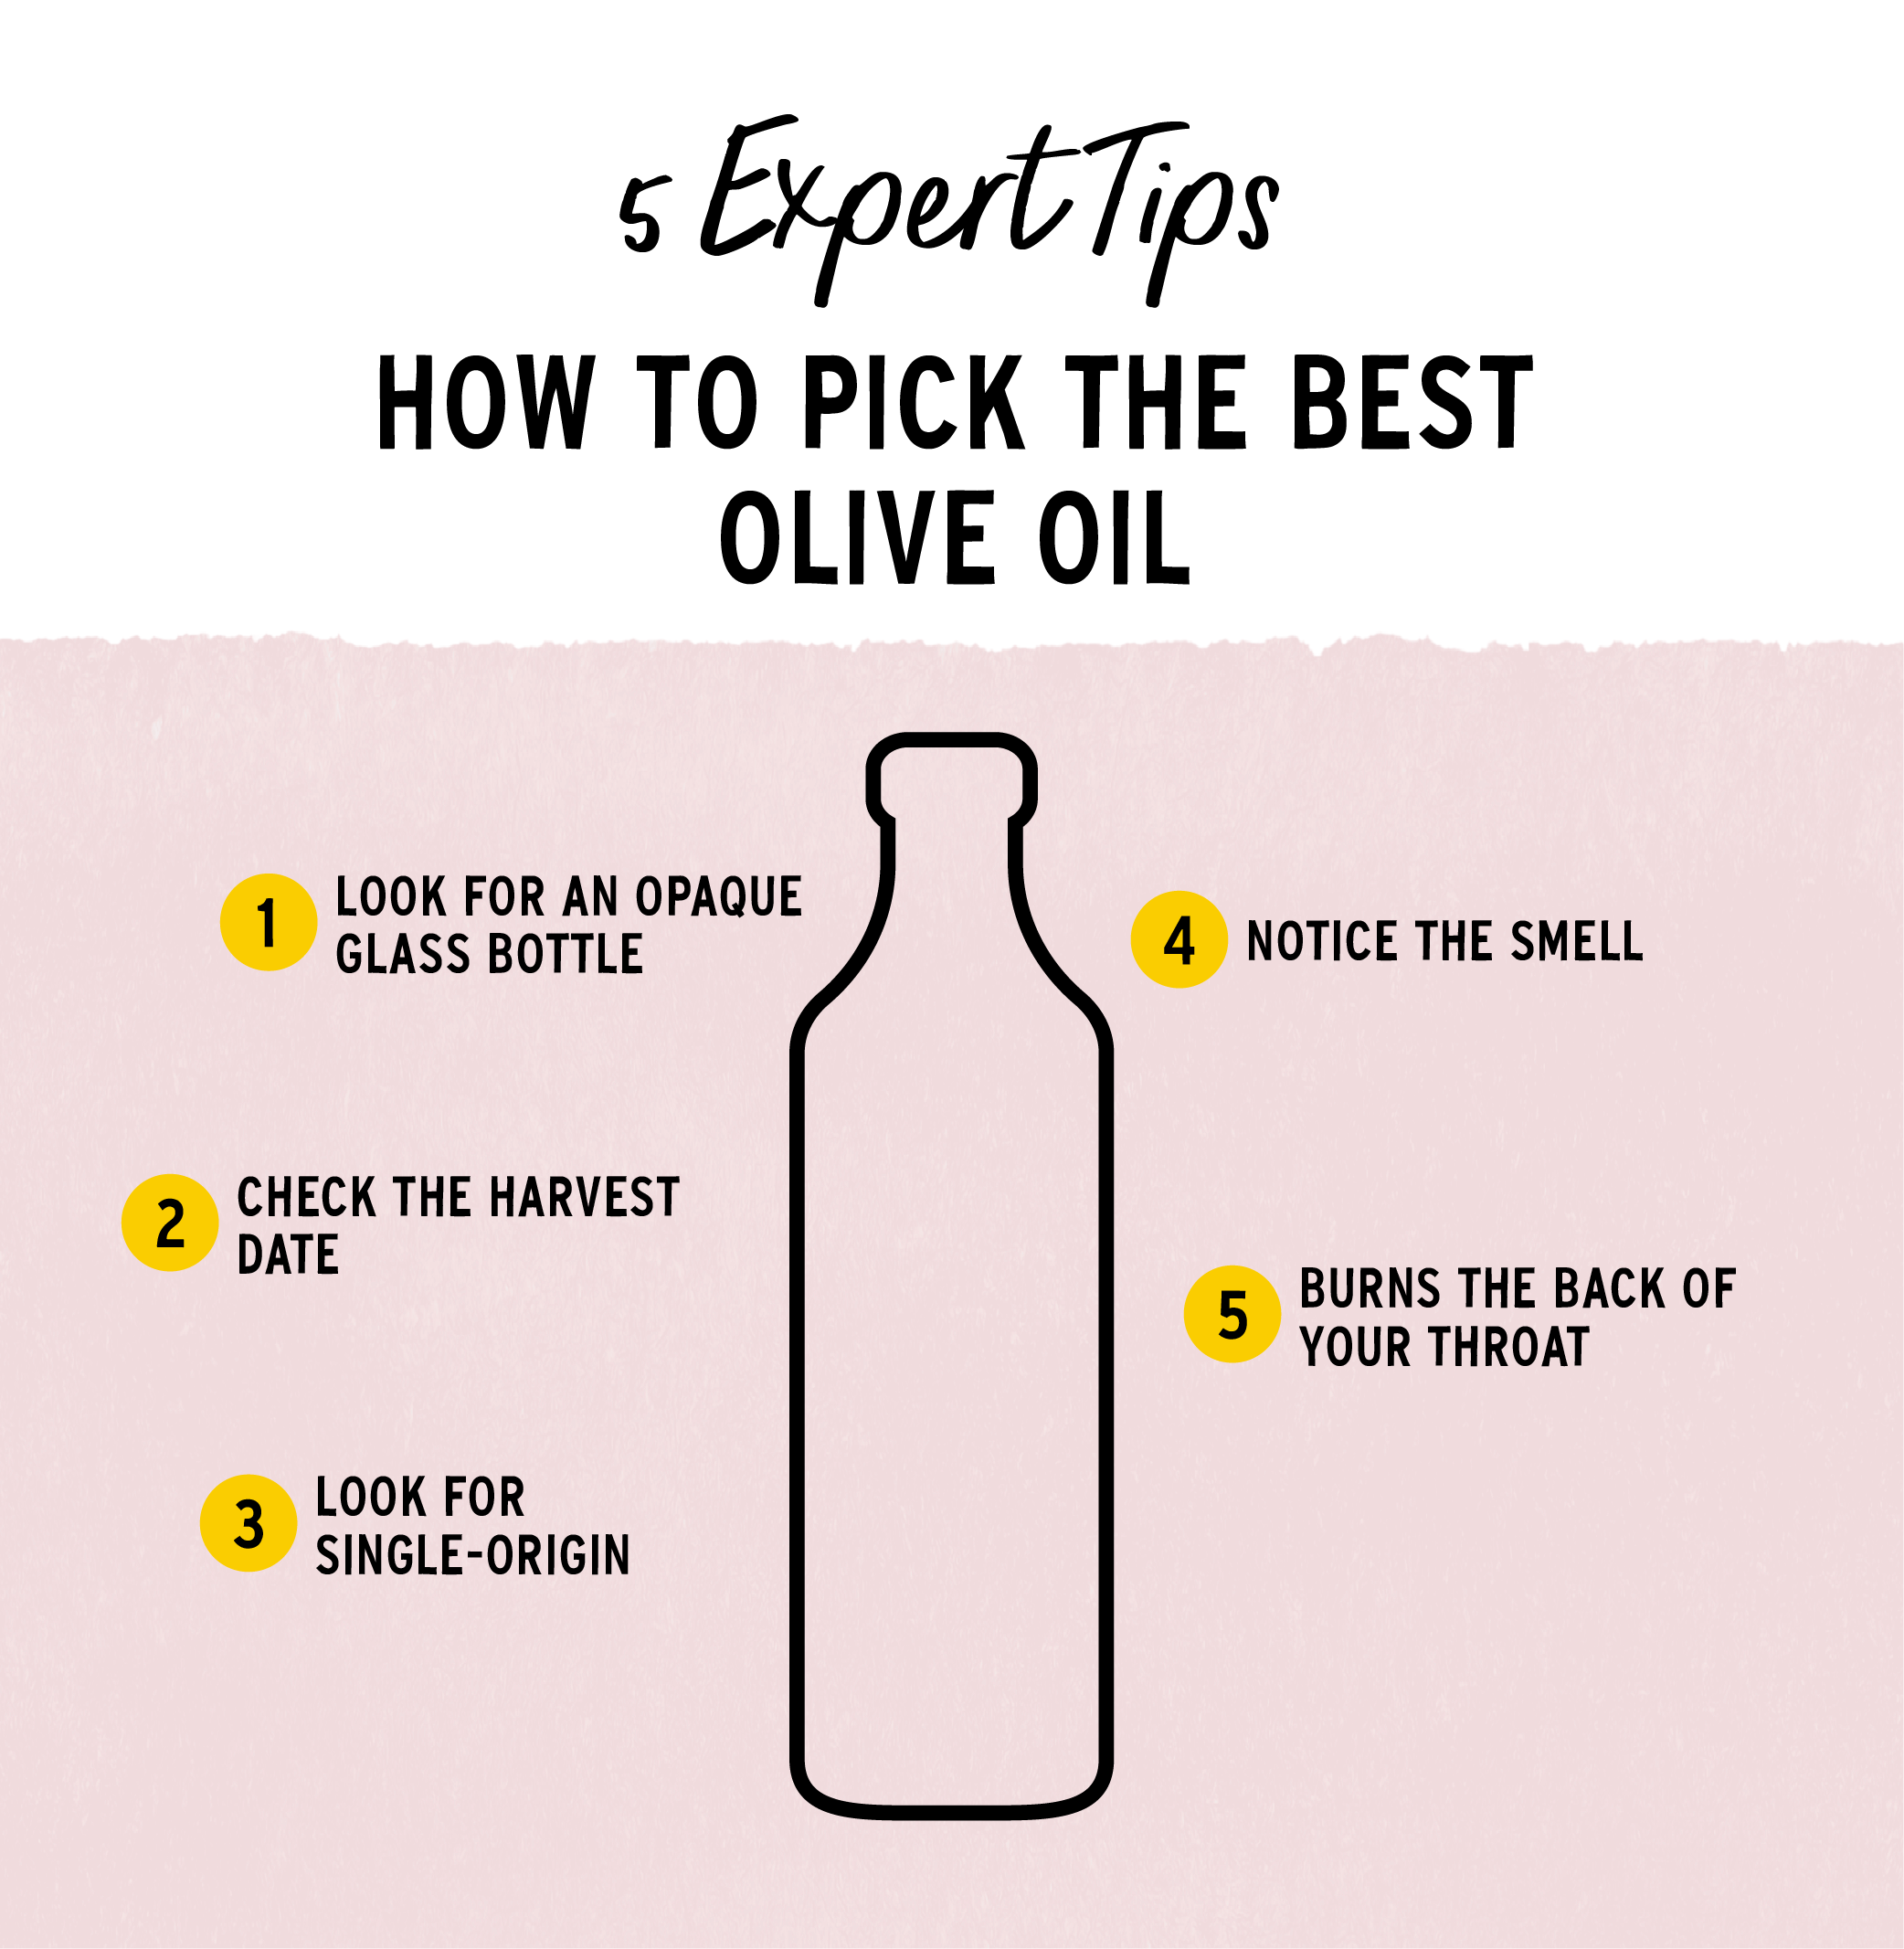 How to Pick the Best Olive Oil: 5 Expert Tips